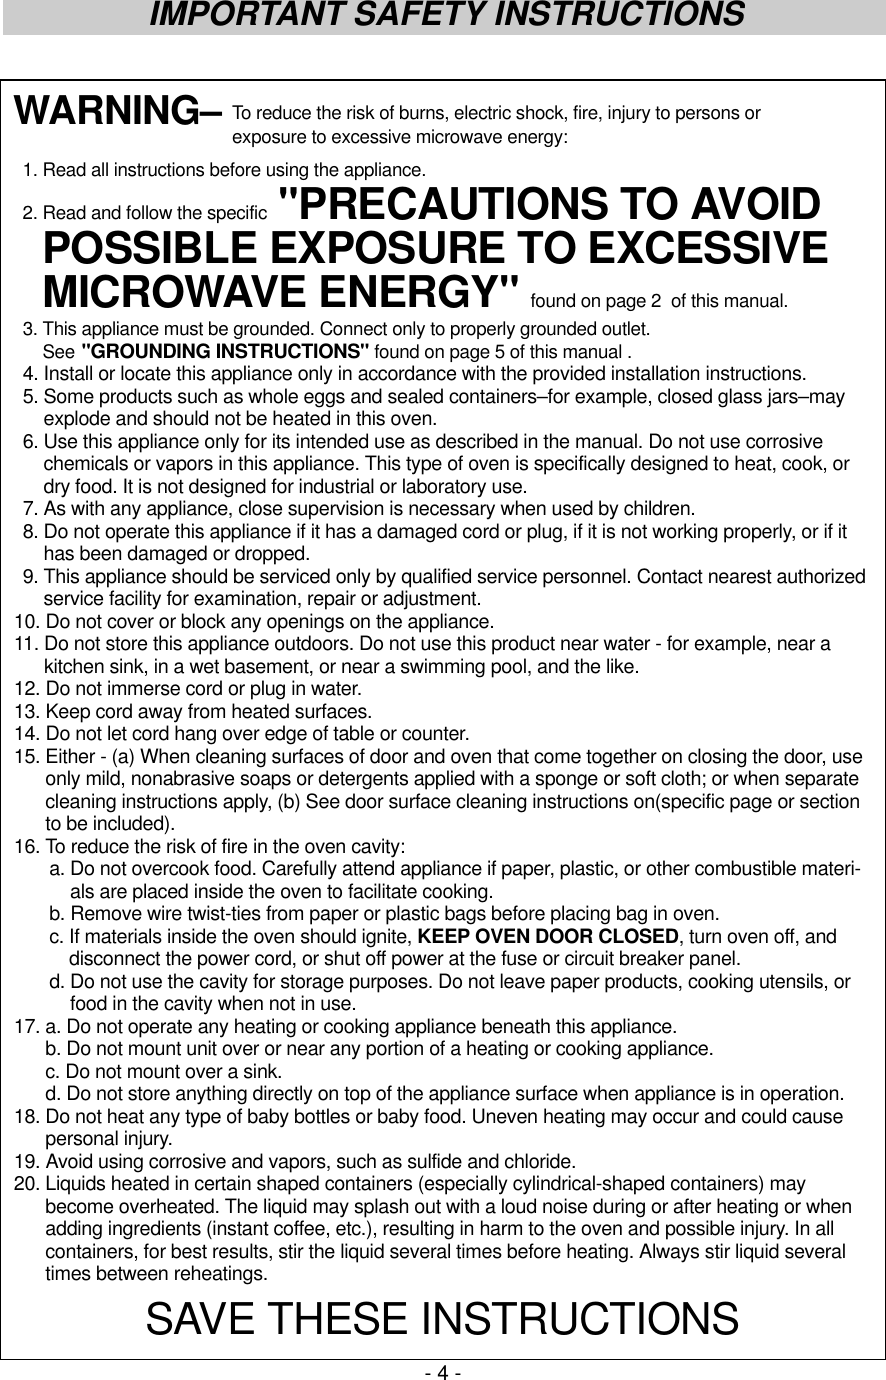 - 4 -IMPORTANT SAFETY INSTRUCTIONSWARNING– To reduce the risk of burns, electric shock, fire, injury to persons or exposure to excessive microwave energy:1. Read all instructions before using the appliance.2. Read and follow the specific &quot;PRECAUTIONS TO AVOIDPOSSIBLE EXPOSURE TO EXCESSIVEMICROWAVE ENERGY&quot; found on page 2  of this manual.3. This appliance must be grounded. Connect only to properly grounded outlet.See &quot;GROUNDING INSTRUCTIONS&quot; found on page 5 of this manual .4. Install or locate this appliance only in accordance with the provided installation instructions.5. Some products such as whole eggs and sealed containers–for example, closed glass jars–mayexplode and should not be heated in this oven.6. Use this appliance only for its intended use as described in the manual. Do not use corrosivechemicals or vapors in this appliance. This type of oven is specifically designed to heat, cook, ordry food. It is not designed for industrial or laboratory use.7. As with any appliance, close supervision is necessary when used by children.8. Do not operate this appliance if it has a damaged cord or plug, if it is not working properly, or if ithas been damaged or dropped.9. This appliance should be serviced only by qualified service personnel. Contact nearest authorizedservice facility for examination, repair or adjustment.10. Do not cover or block any openings on the appliance.11. Do not store this appliance outdoors. Do not use this product near water - for example, near akitchen sink, in a wet basement, or near a swimming pool, and the like.12. Do not immerse cord or plug in water.13. Keep cord away from heated surfaces.14. Do not let cord hang over edge of table or counter.15. Either - (a) When cleaning surfaces of door and oven that come together on closing the door, useonly mild, nonabrasive soaps or detergents applied with a sponge or soft cloth; or when separatecleaning instructions apply, (b) See door surface cleaning instructions on(specific page or sectionto be included).16. To reduce the risk of fire in the oven cavity:a. Do not overcook food. Carefully attend appliance if paper, plastic, or other combustible materi-als are placed inside the oven to facilitate cooking.b. Remove wire twist-ties from paper or plastic bags before placing bag in oven.c. If materials inside the oven should ignite, KEEP OVEN DOOR CLOSED, turn oven off, anddisconnect the power cord, or shut off power at the fuse or circuit breaker panel.d. Do not use the cavity for storage purposes. Do not leave paper products, cooking utensils, orfood in the cavity when not in use.17. a. Do not operate any heating or cooking appliance beneath this appliance.b. Do not mount unit over or near any portion of a heating or cooking appliance.c. Do not mount over a sink.d. Do not store anything directly on top of the appliance surface when appliance is in operation.18. Do not heat any type of baby bottles or baby food. Uneven heating may occur and could causepersonal injury.19. Avoid using corrosive and vapors, such as sulfide and chloride.20. Liquids heated in certain shaped containers (especially cylindrical-shaped containers) maybecome overheated. The liquid may splash out with a loud noise during or after heating or whenadding ingredients (instant coffee, etc.), resulting in harm to the oven and possible injury. In allcontainers, for best results, stir the liquid several times before heating. Always stir liquid severaltimes between reheatings.SAVE THESE INSTRUCTIONS